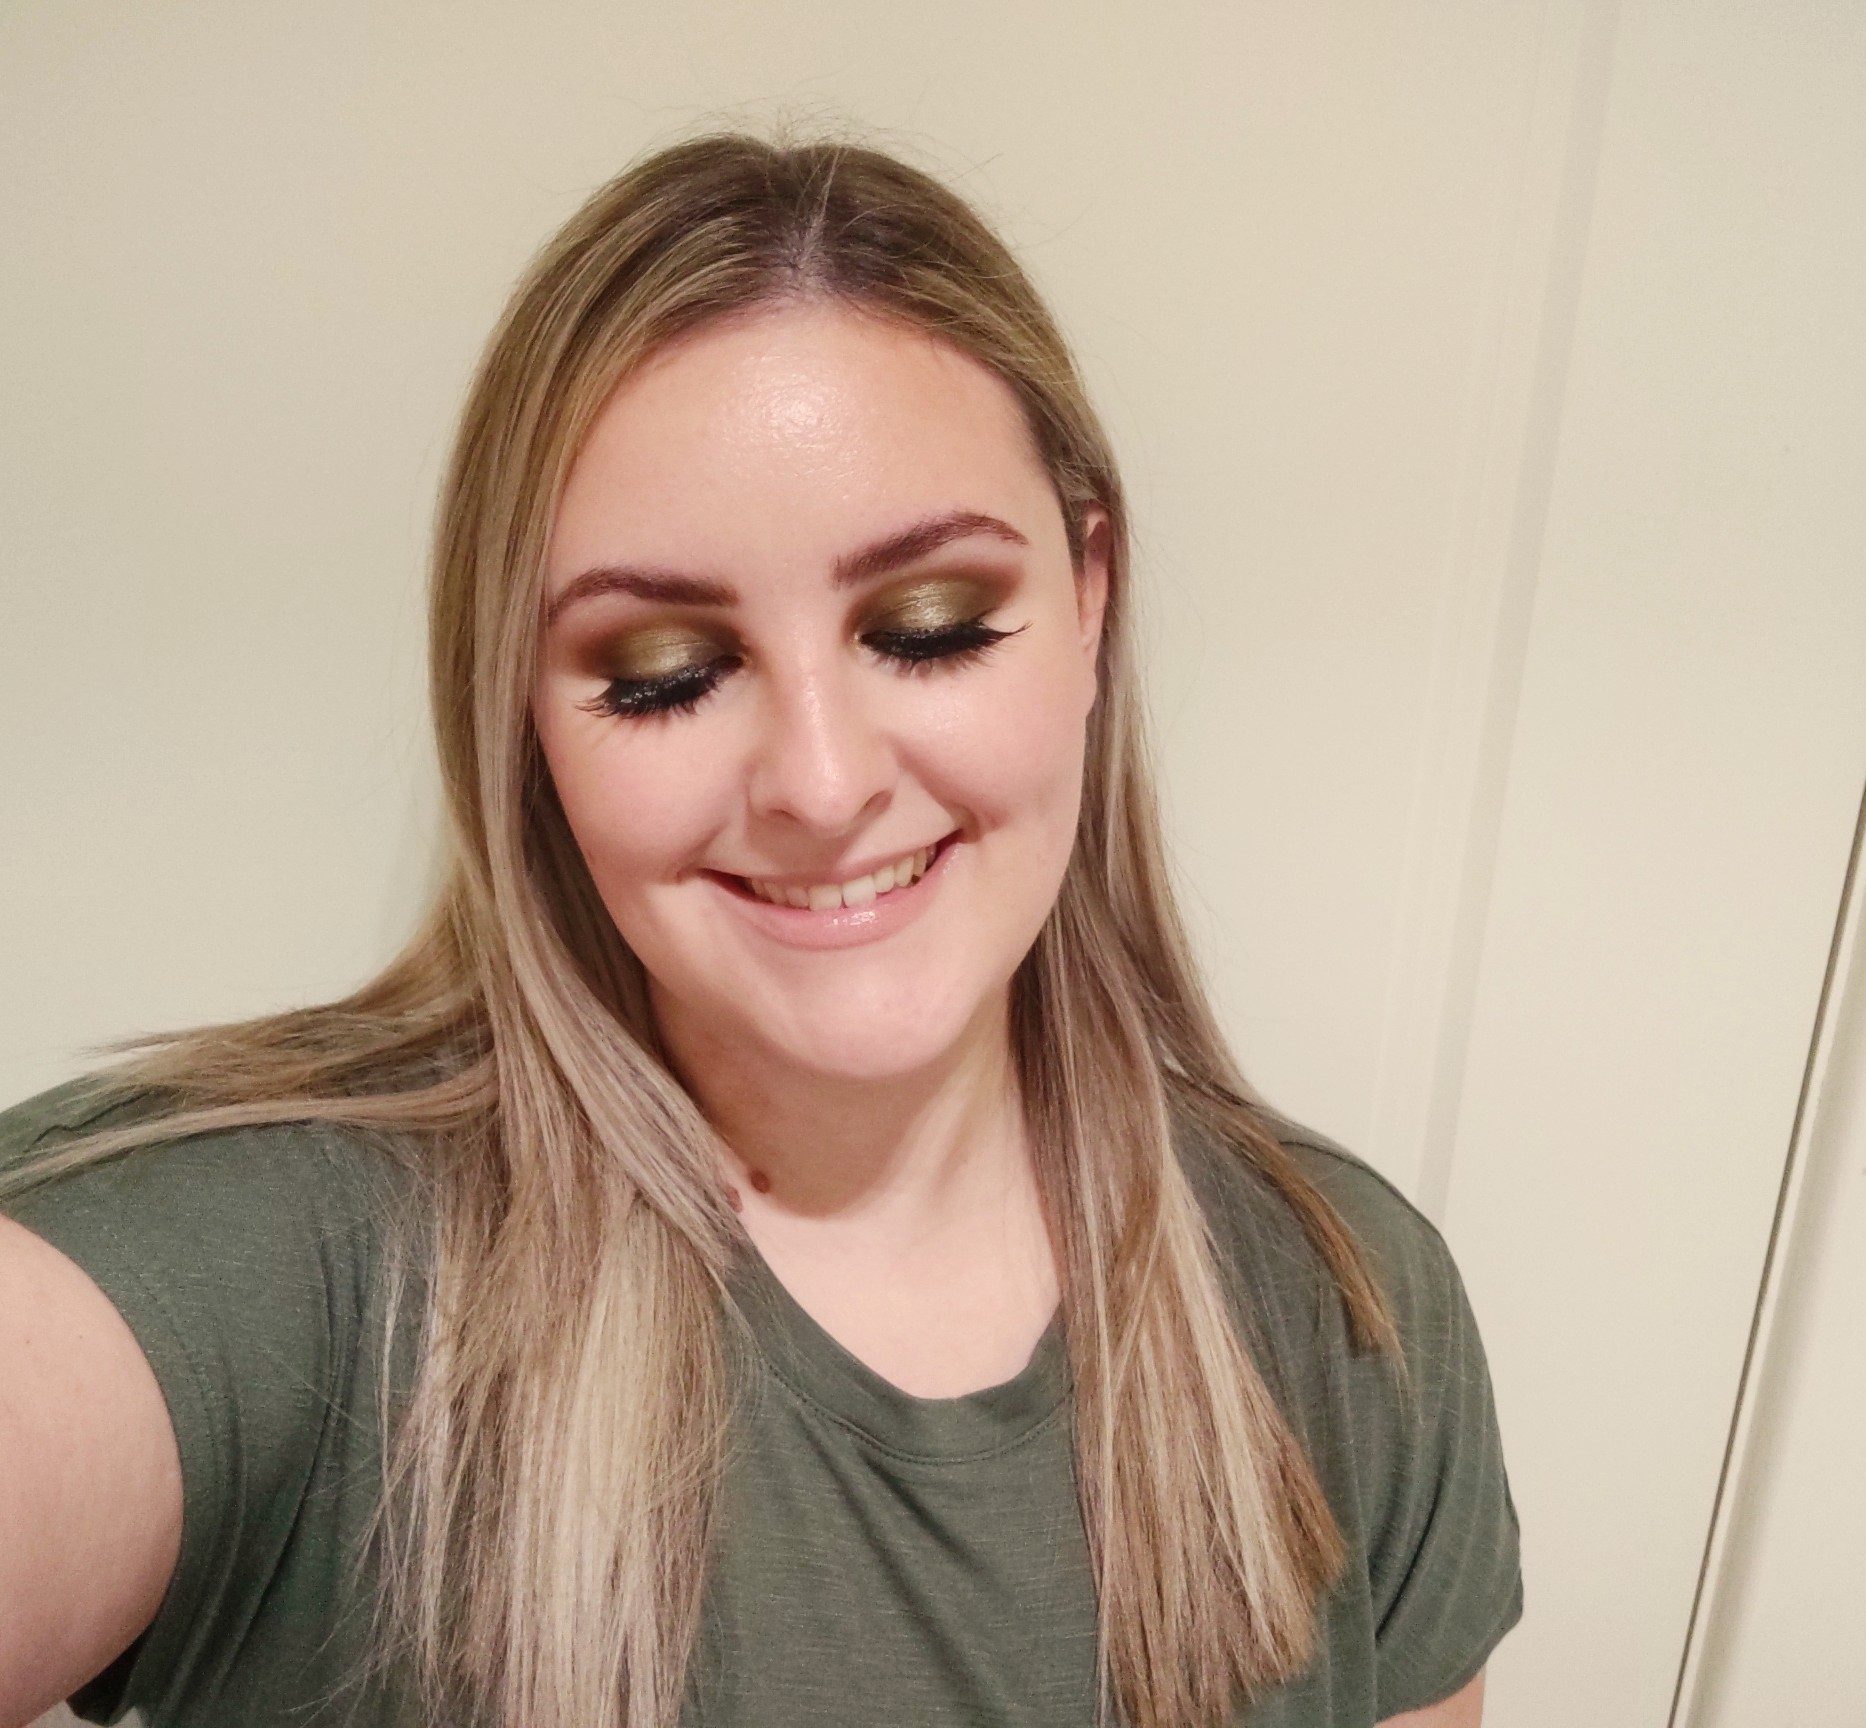 A selfie of Bethany, a woman with long, dark blond hair, smiling with her eyes closed to show off shimmery olive green eye makeup and long, thick eyelashes.